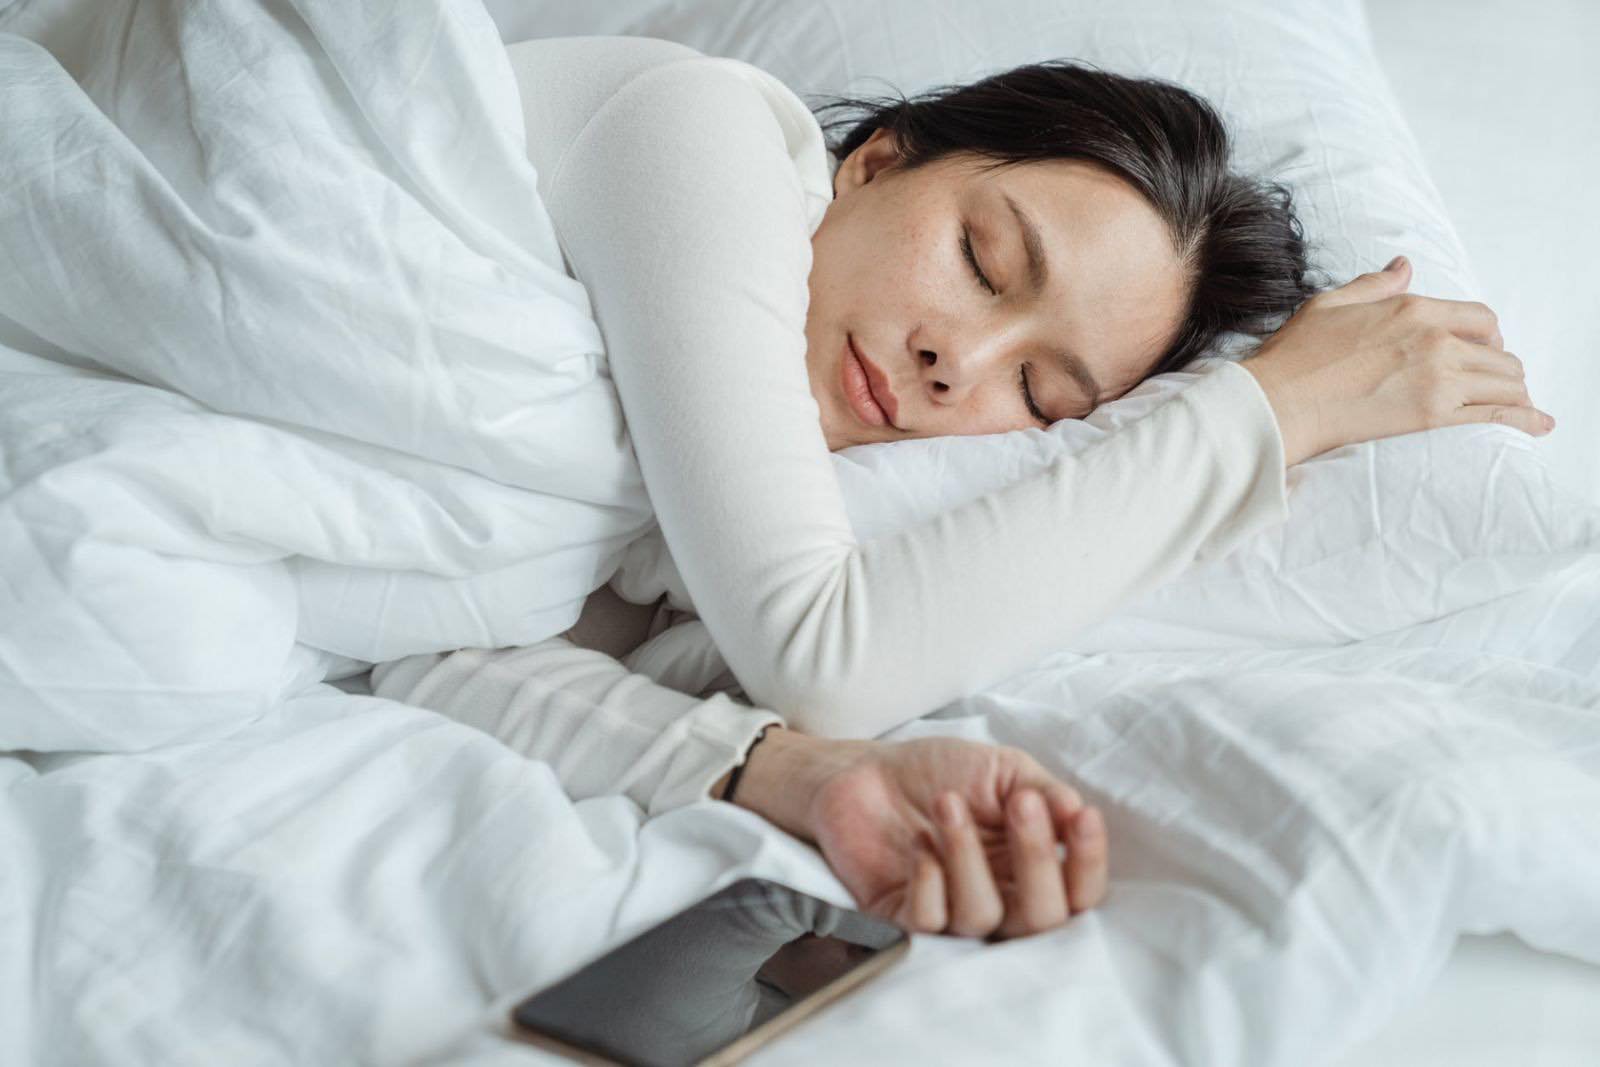 Sleeping too much is a sign of what disease?  Is it dangerous? 